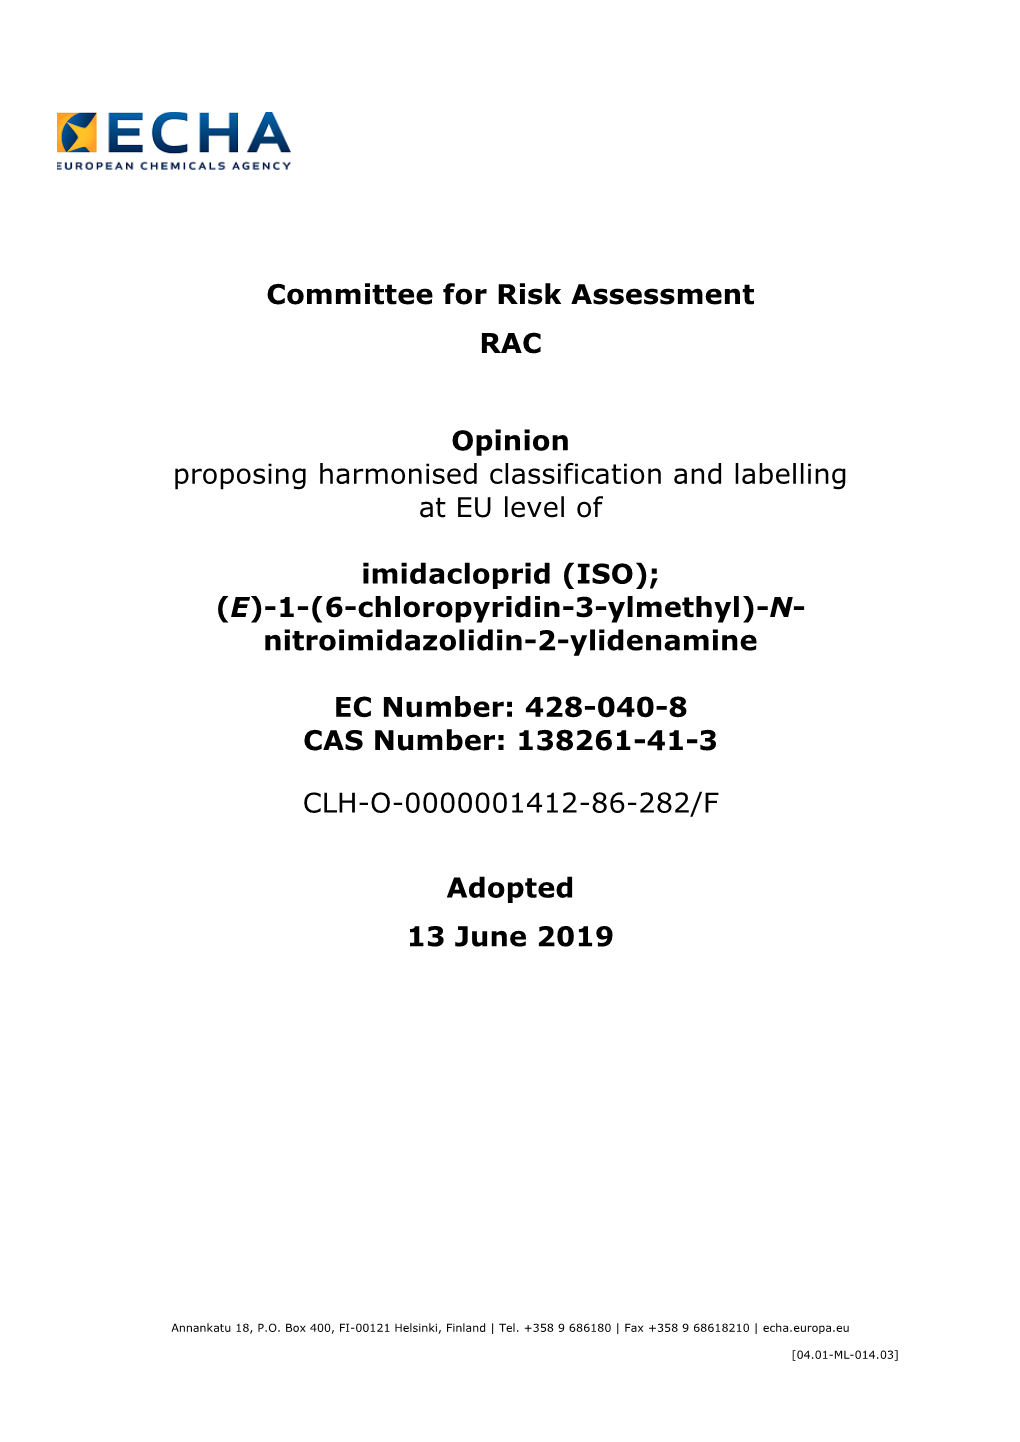 Committee for Risk Assessment RAC Opinion Proposing